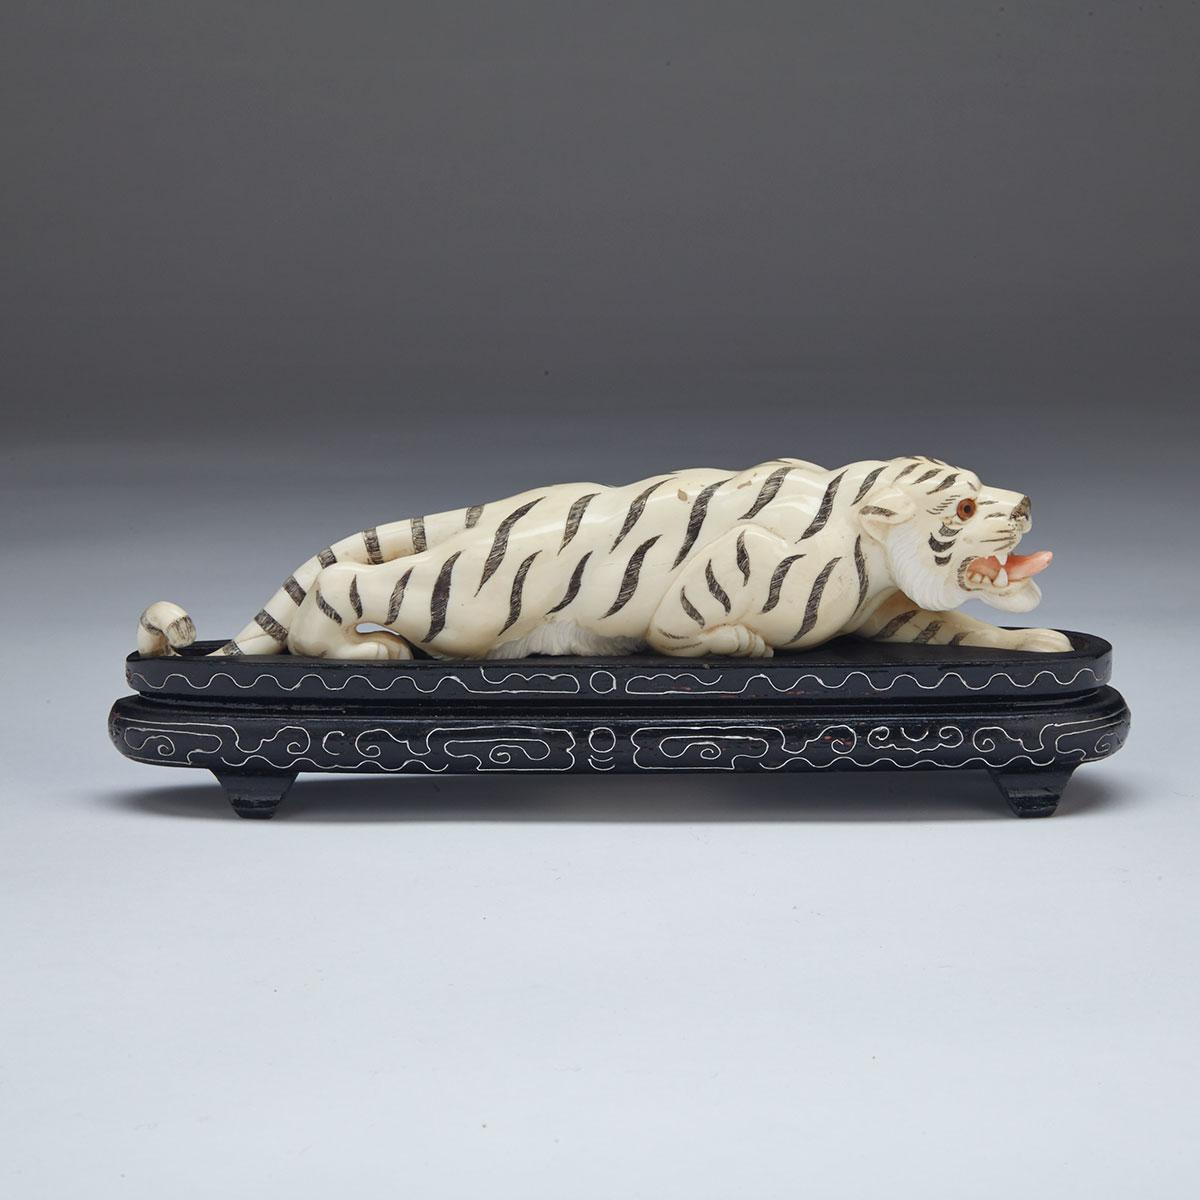 Polychromed Ivory Okimono of a Tiger, Early 20th Century